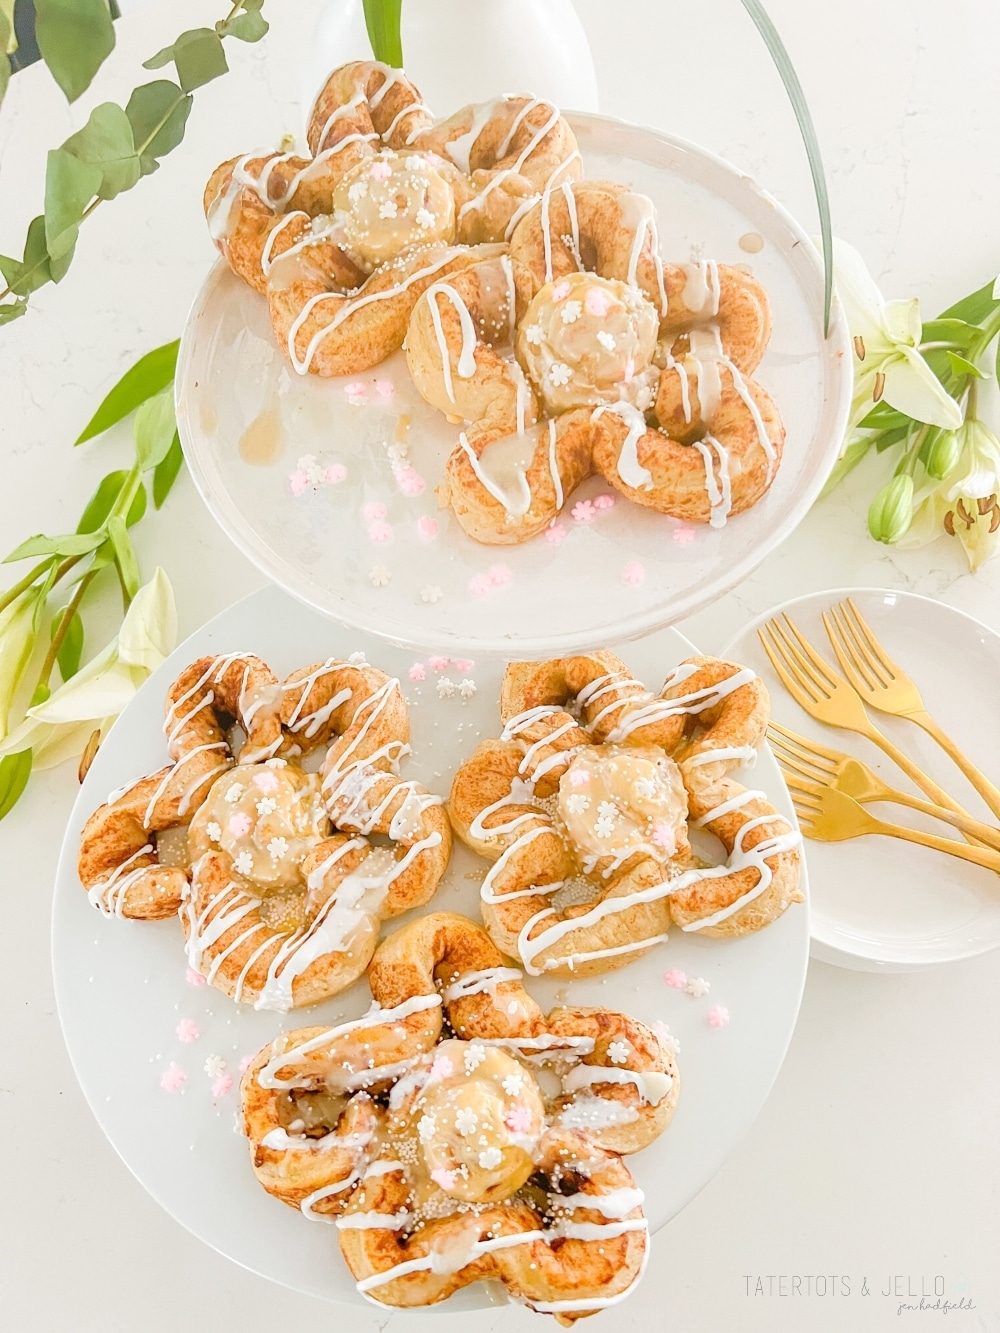 Easy Brunch Flower Cinnamon Rolls. Use refrigerated cinnamon rolls to create these super easy and delicious flower-shaped cinnamon rolls that are perfect for Mother's Day or Spring brunches.